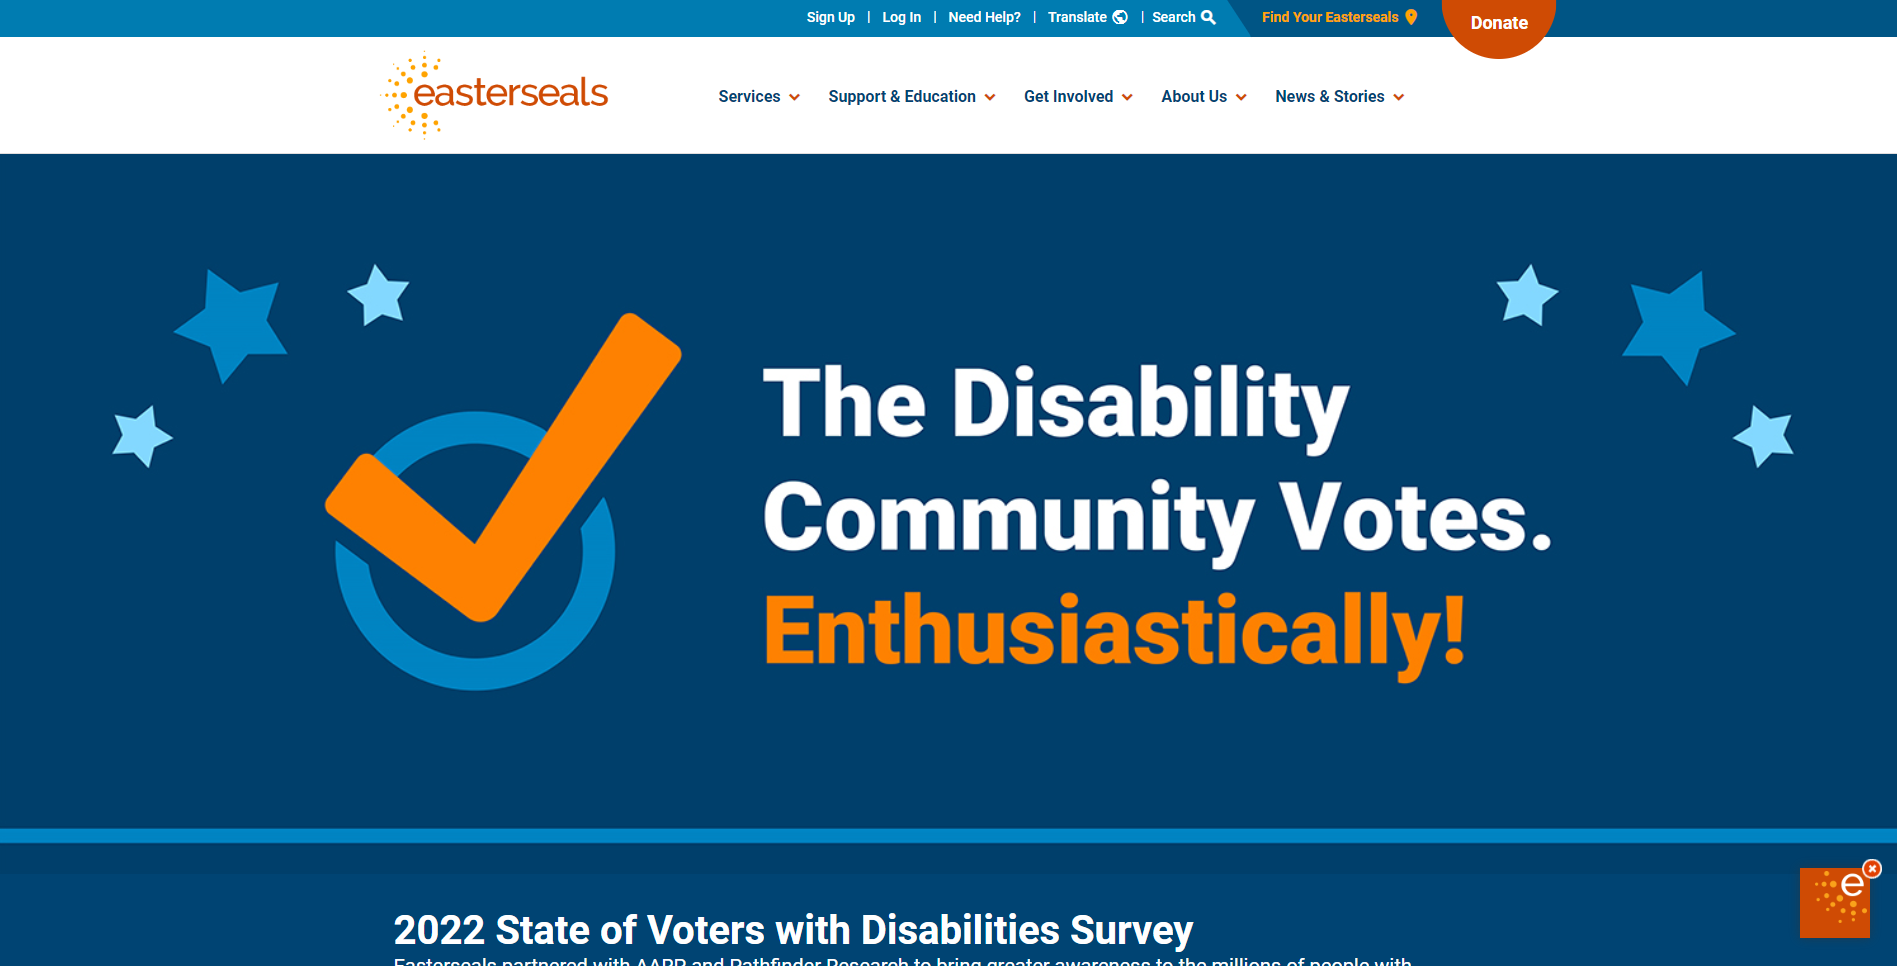 Easterseals Community and Disability Services